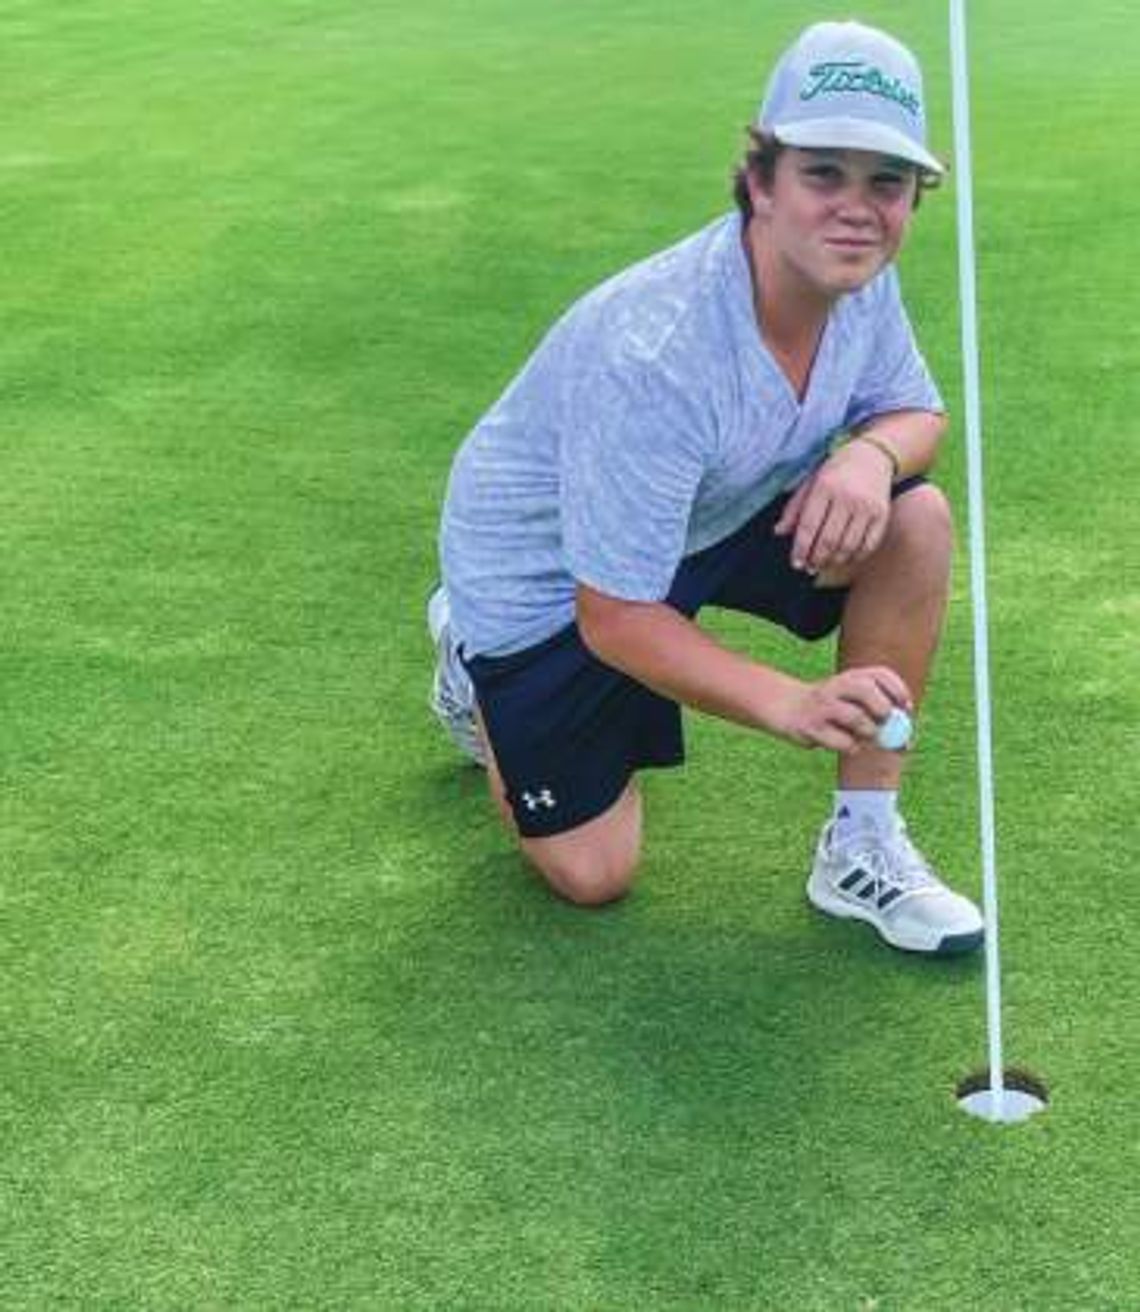 Carson Clark cards hole in one